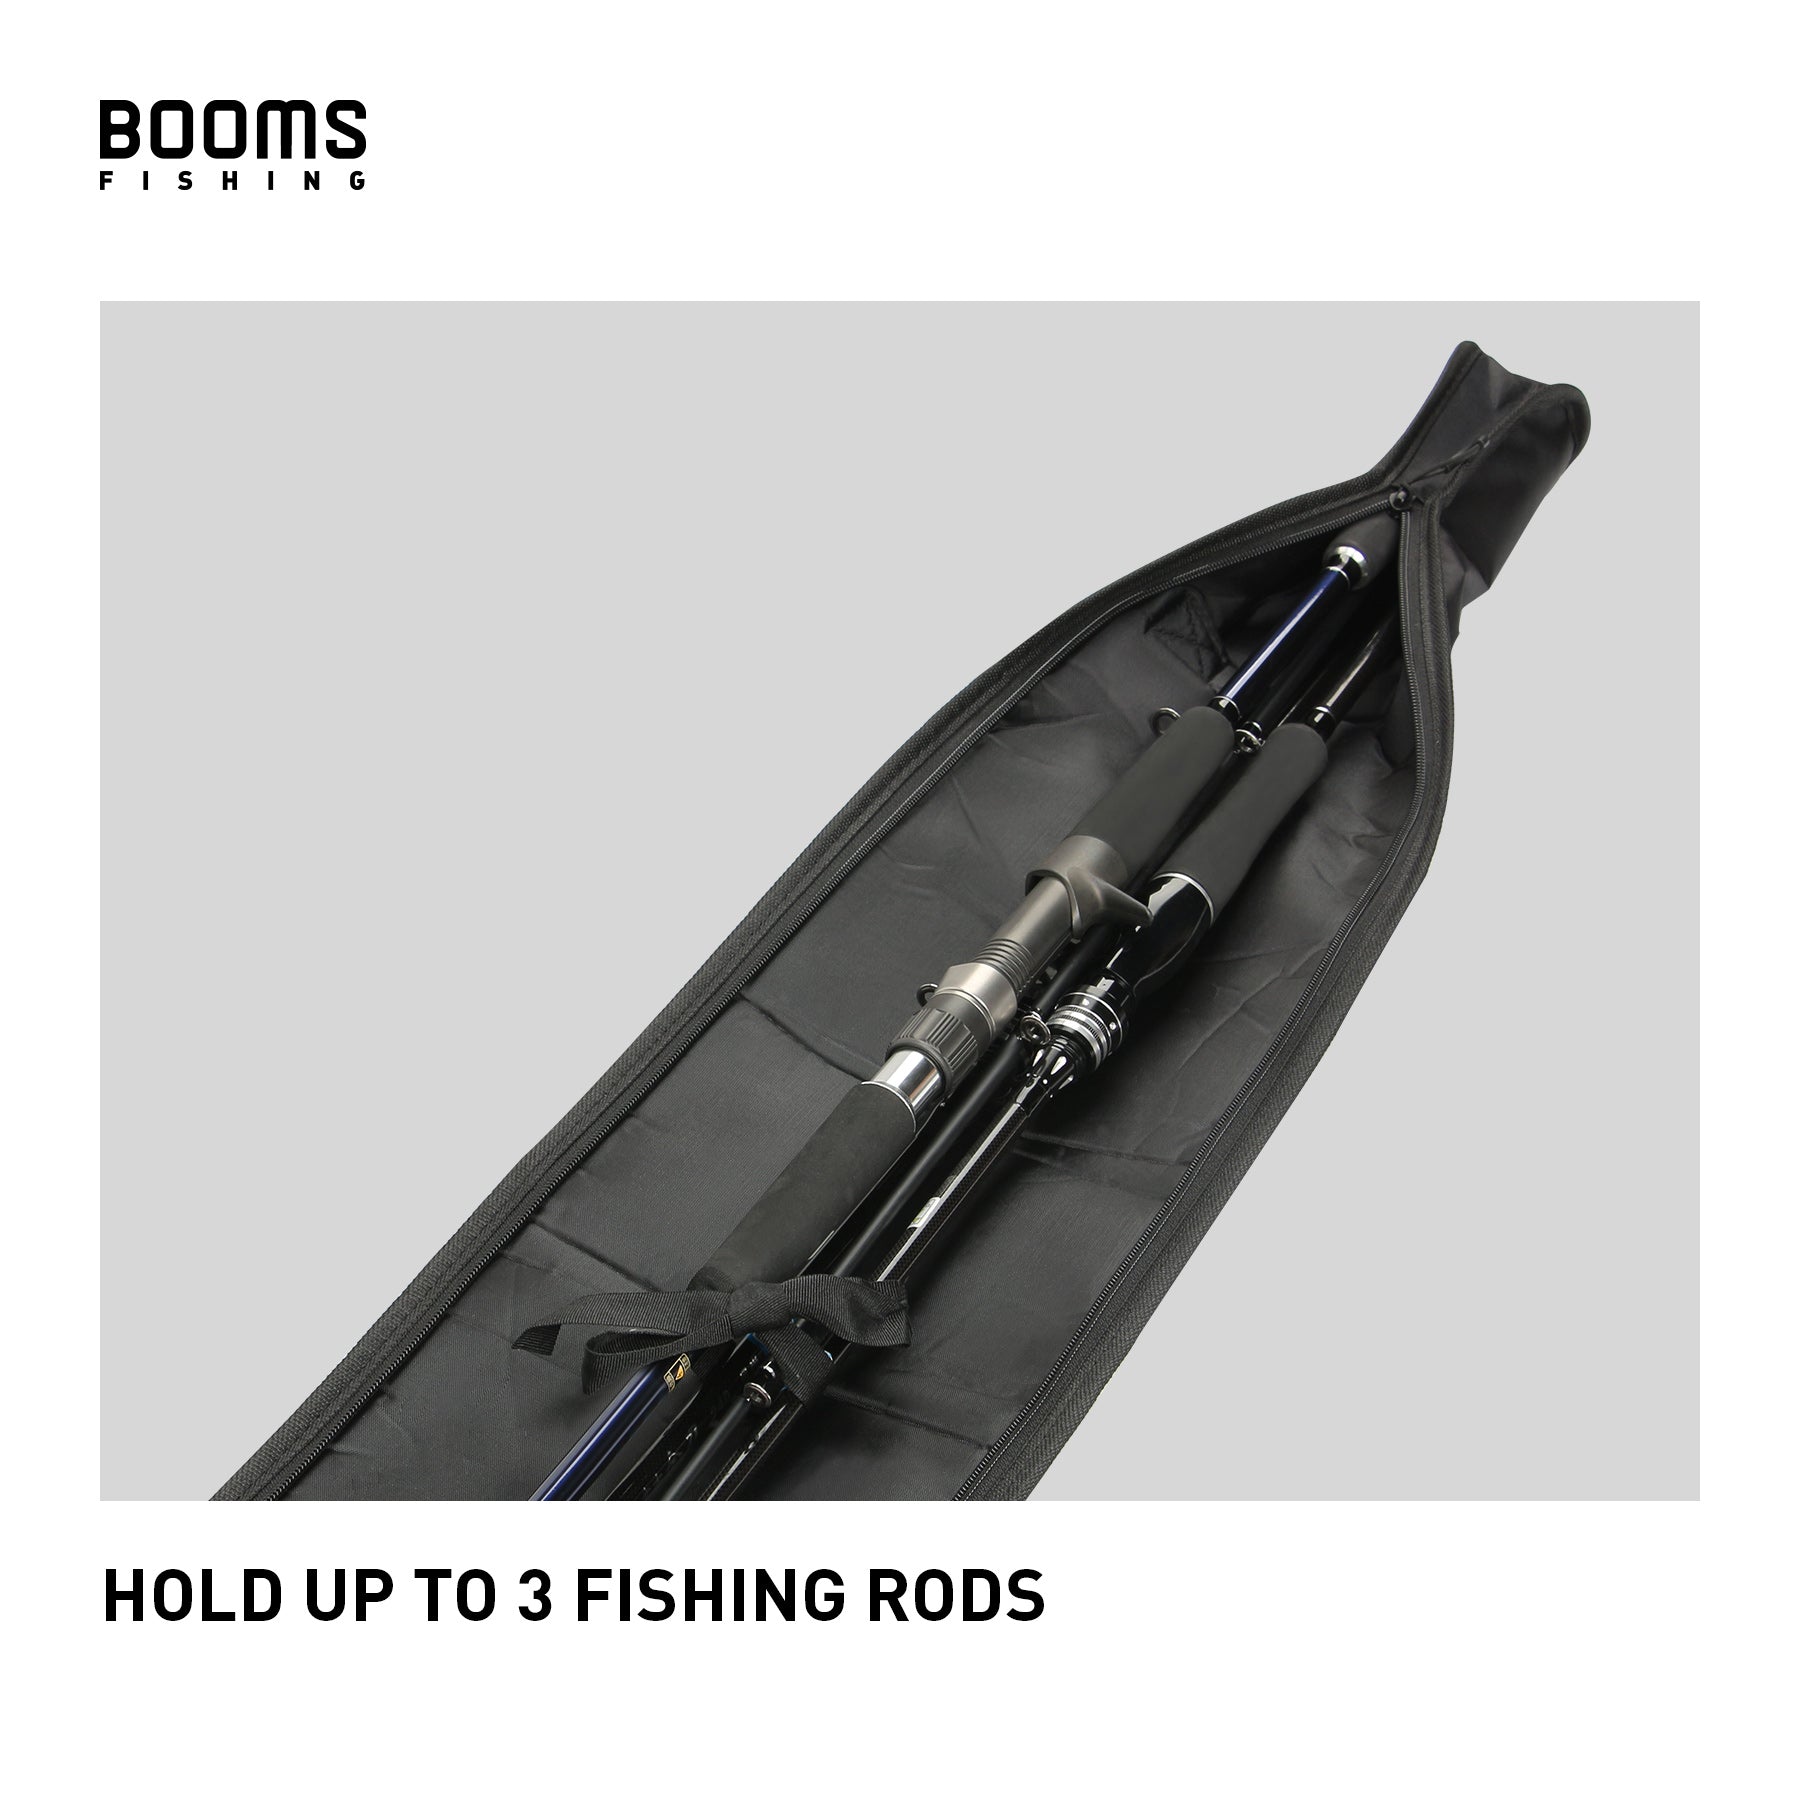 Booms Fishing PB3 Fishing Rod Bag Pole Storage Case 130 cm to 215 cm  Folding Apply to Multi-size Fishing Reel Rods Bags Cases